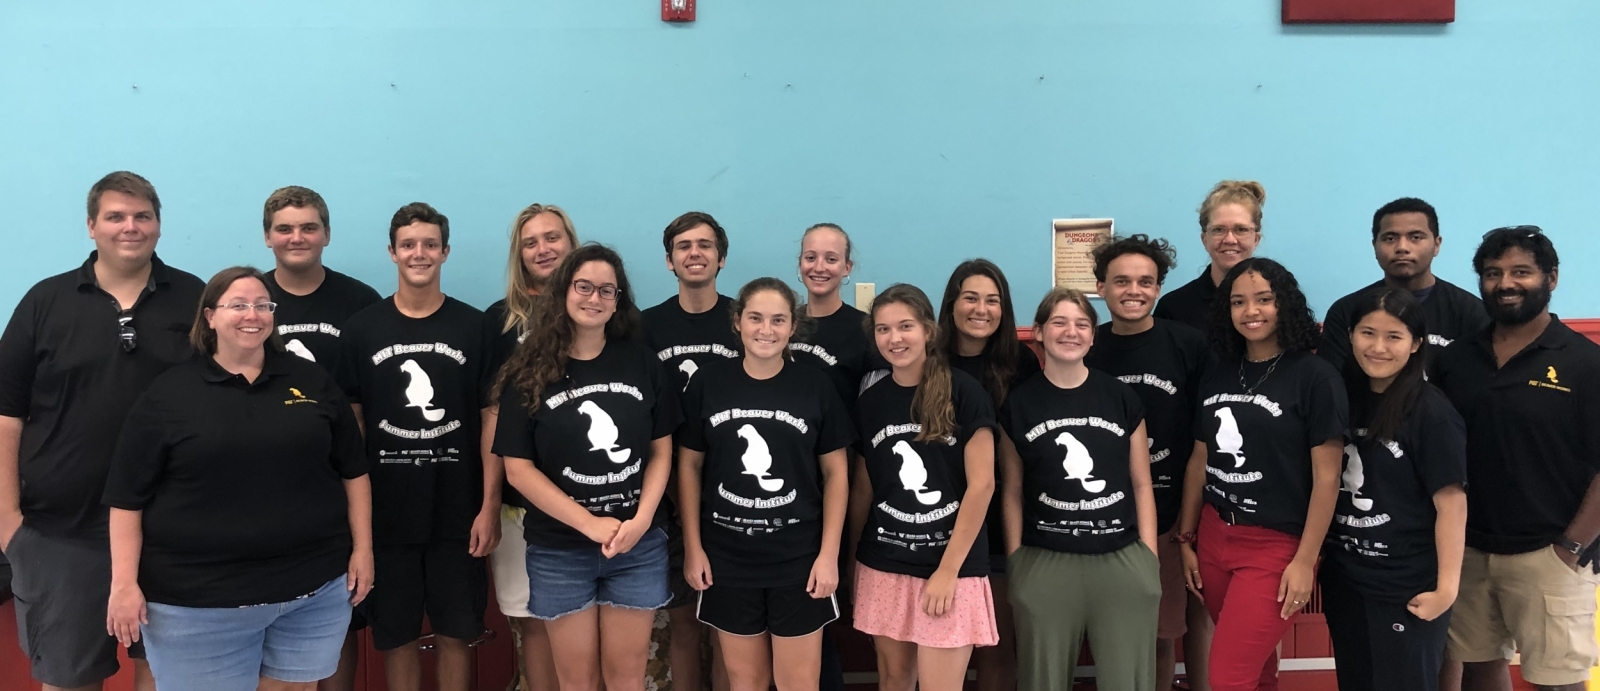 Students from the Kwajalein BWSI 2020 program pose for a photo with Laboratory staff members and instructors Jon Schoenenberger, Sarah Willis, Karyn Lundberg, and Thomas Sebastian.